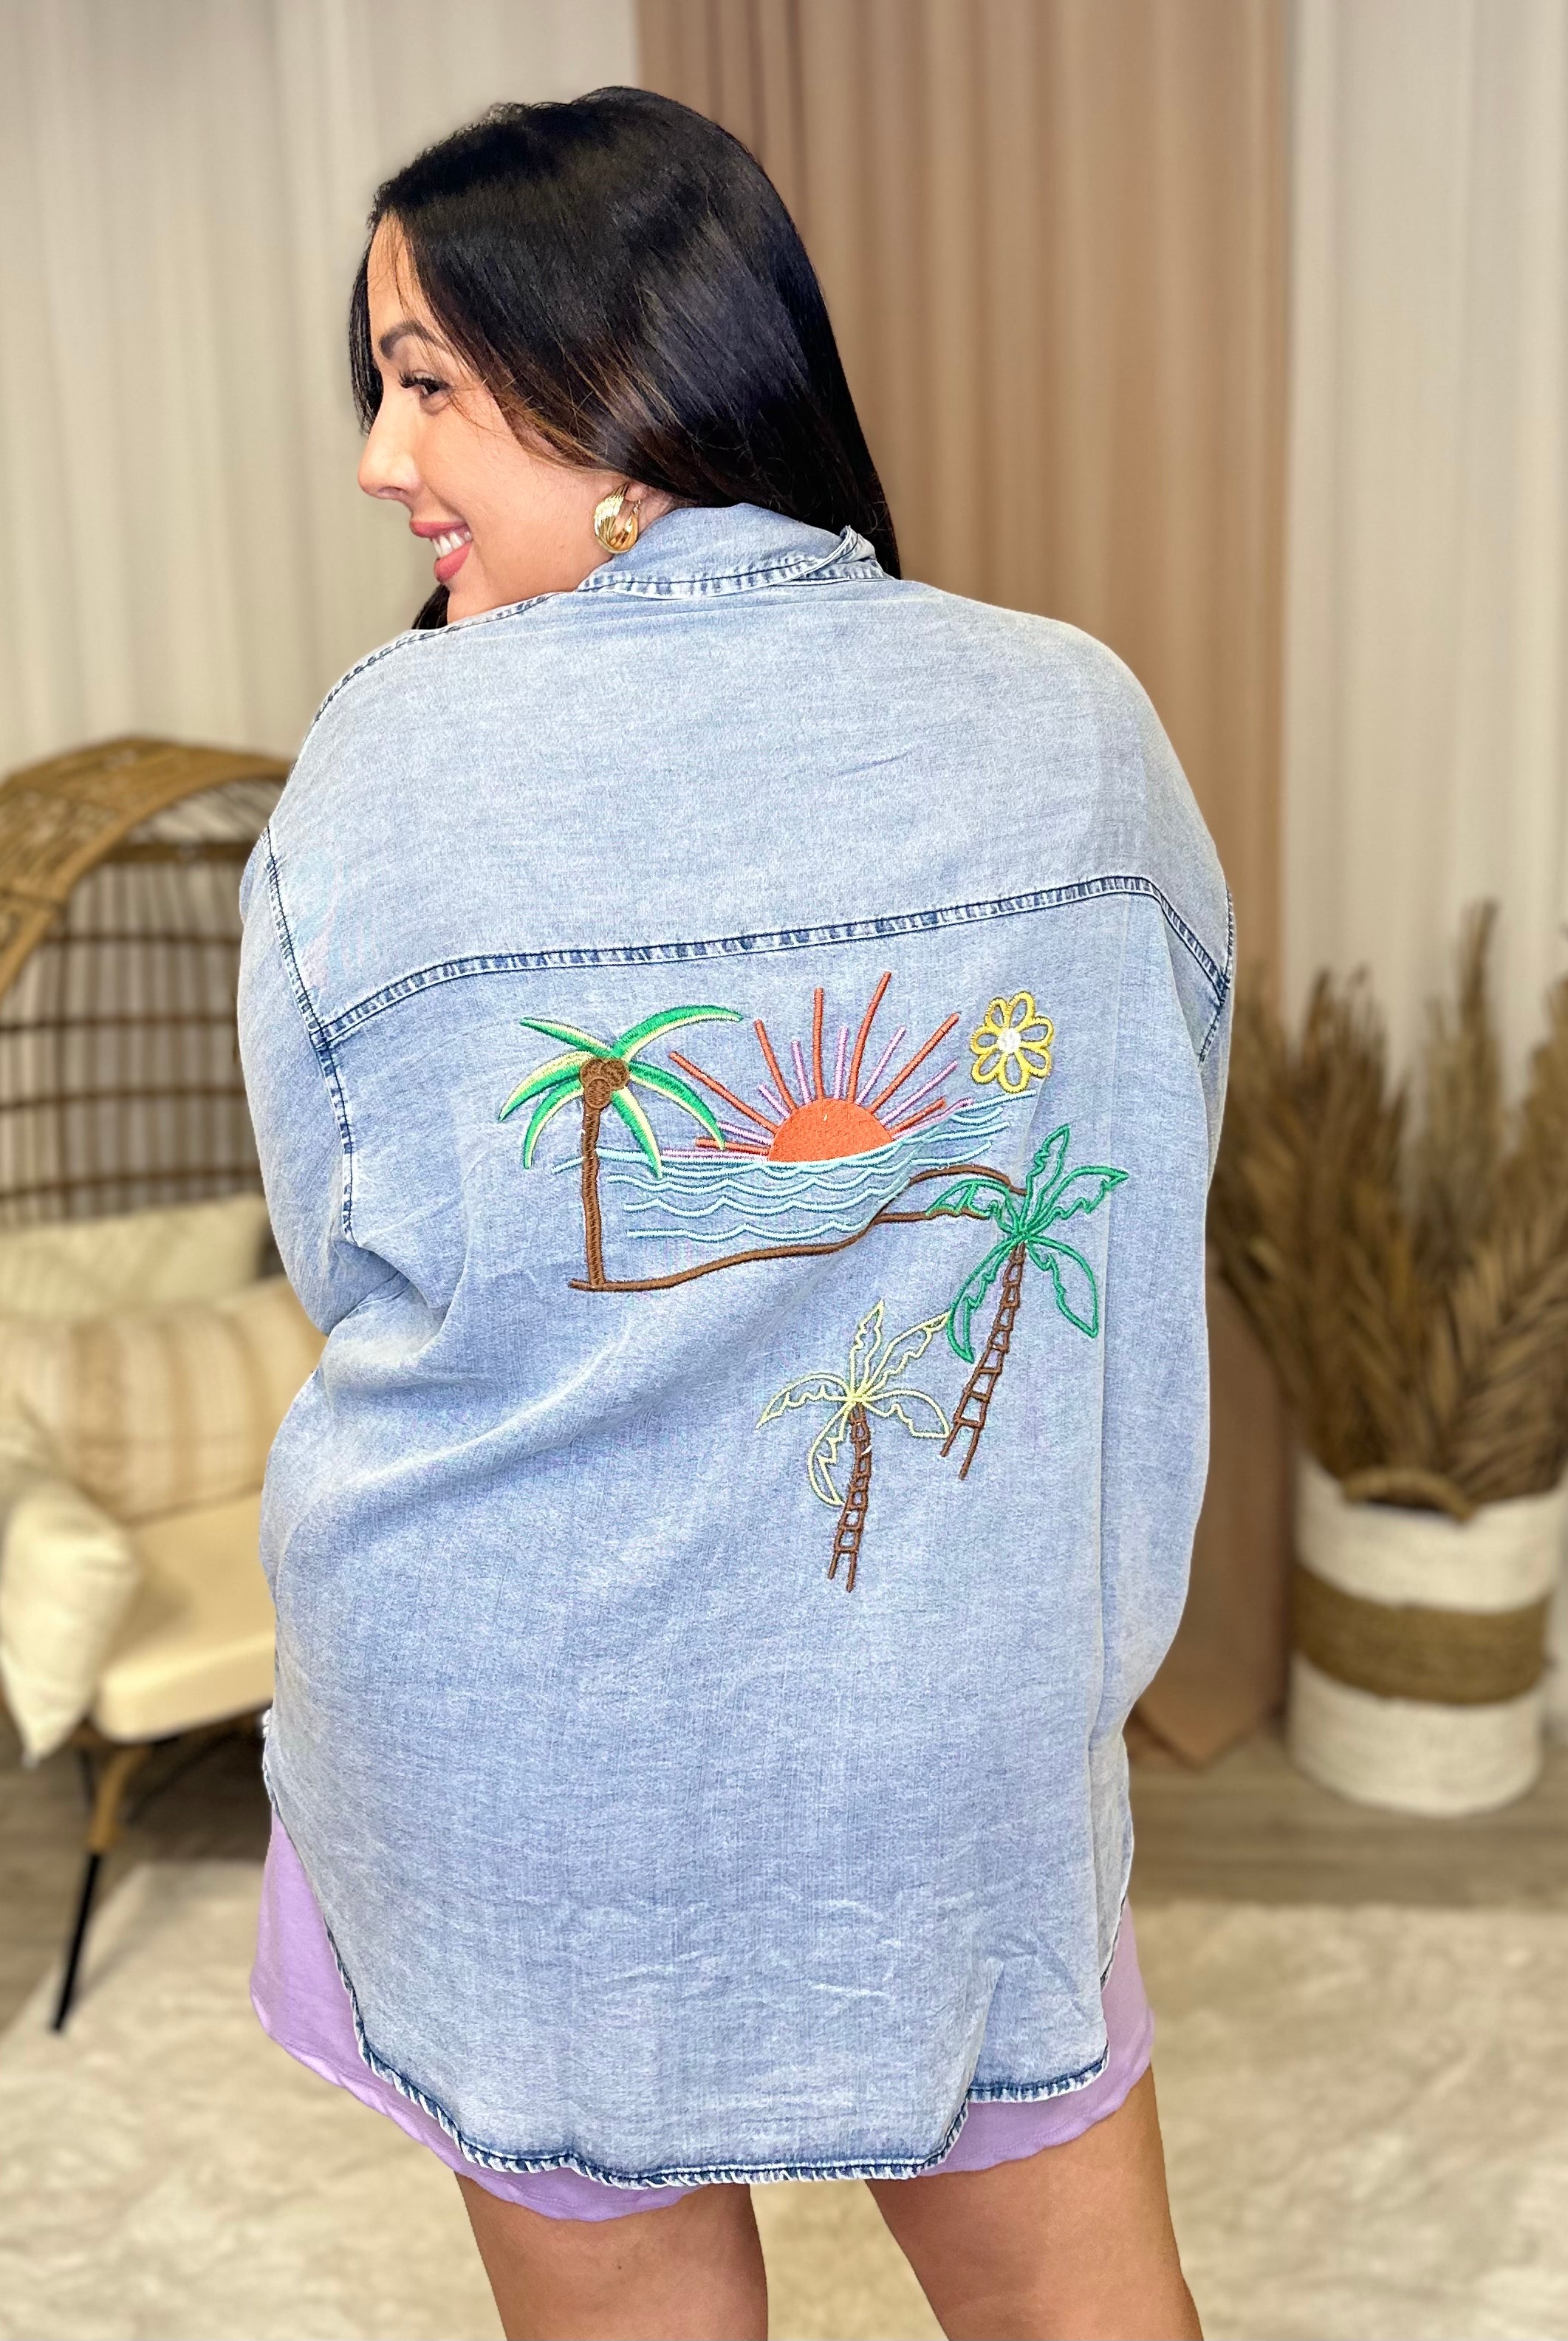 RESTOCK : Once Upon a Time Button Down Top-120 Long Sleeve Tops-BlueVelvet-Heathered Boho Boutique, Women's Fashion and Accessories in Palmetto, FL